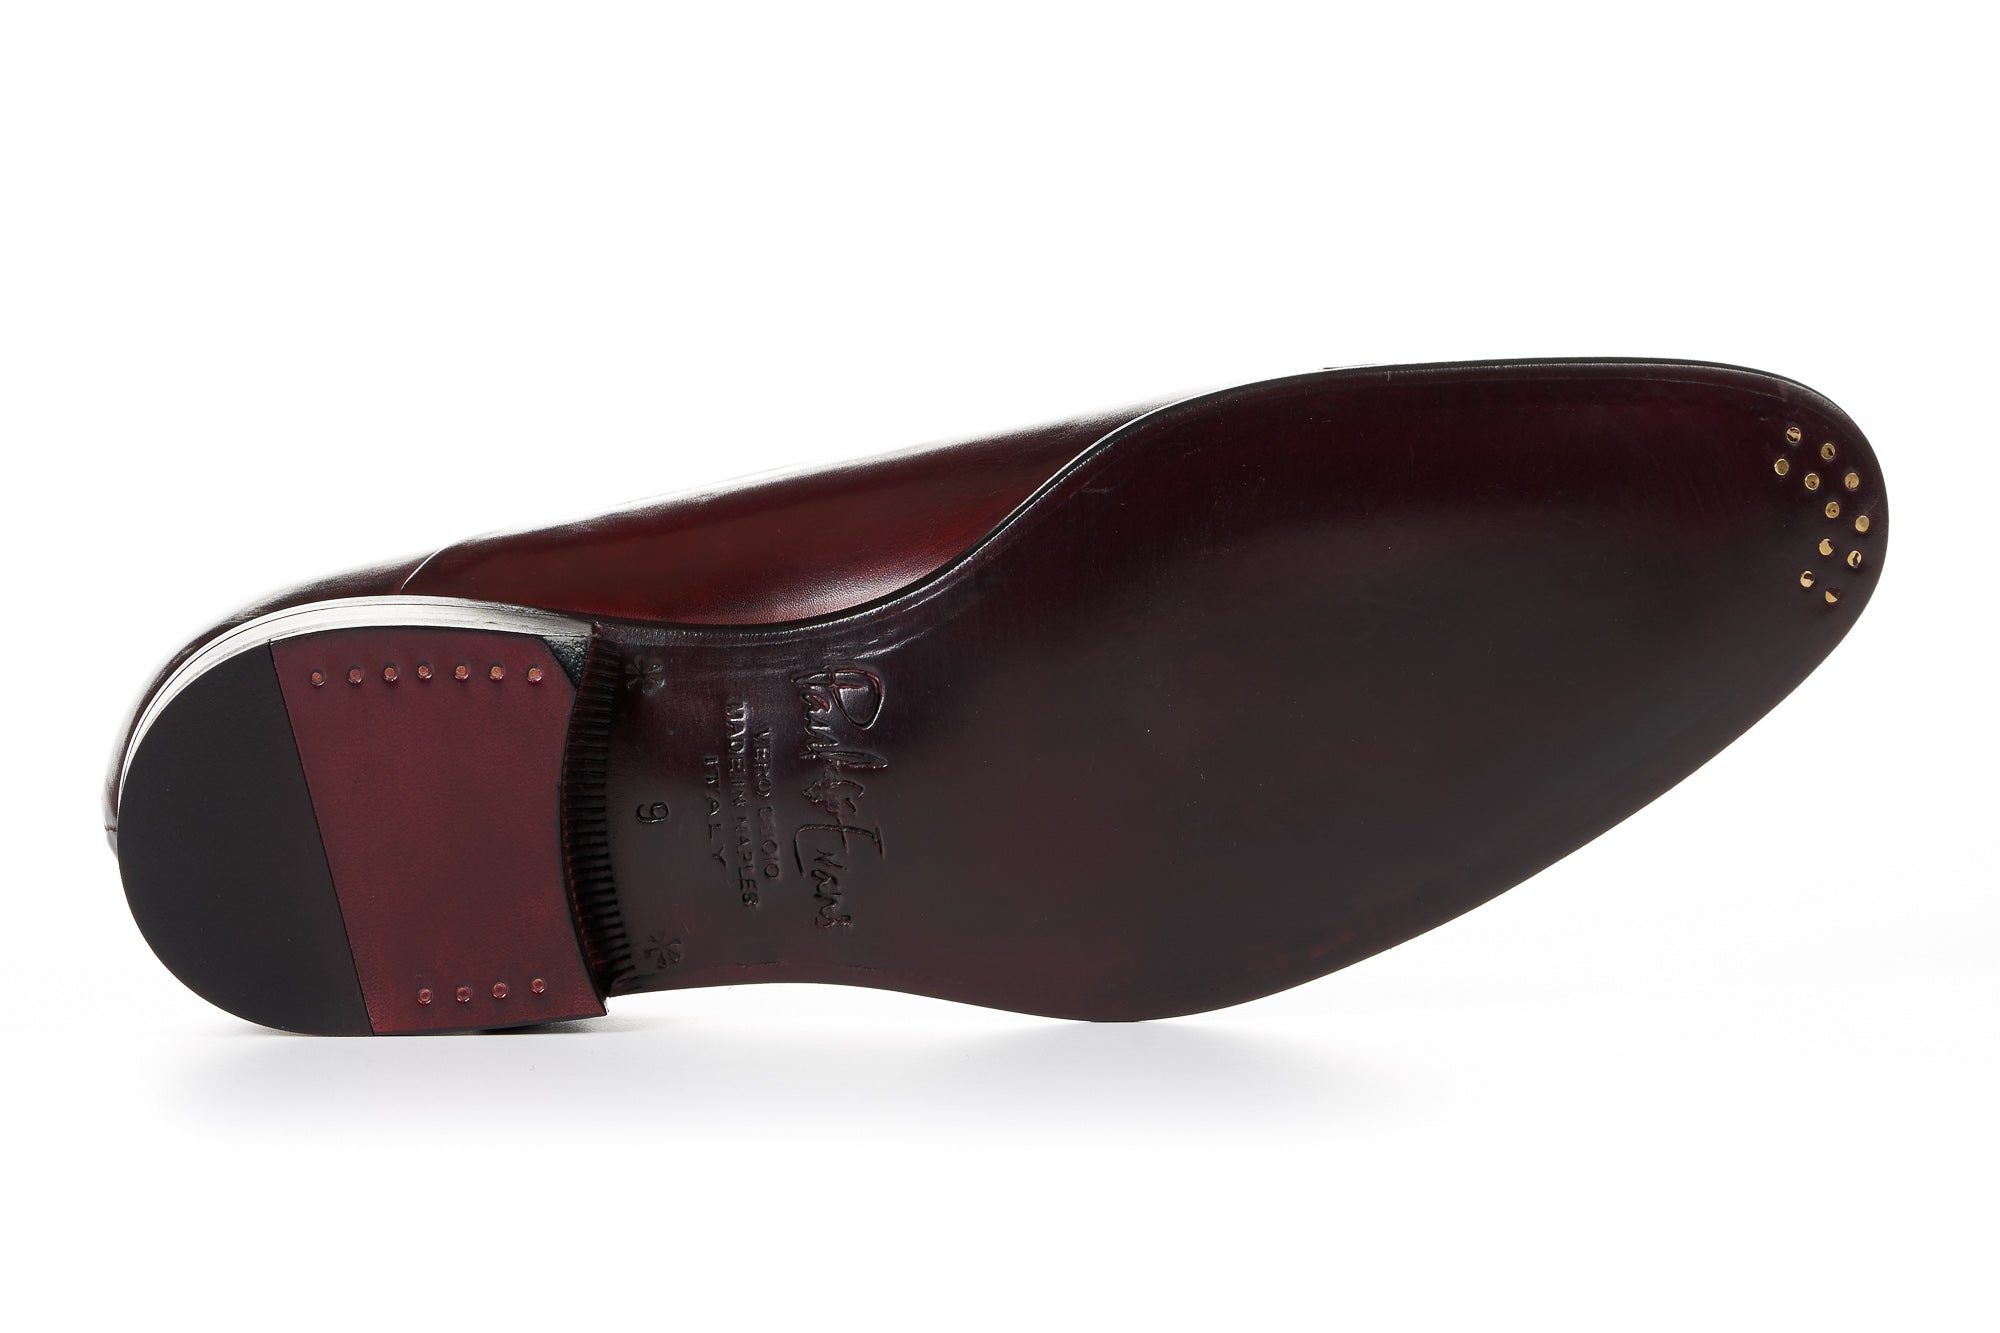 The Cagney Cap-Toe Oxford - Oxblood